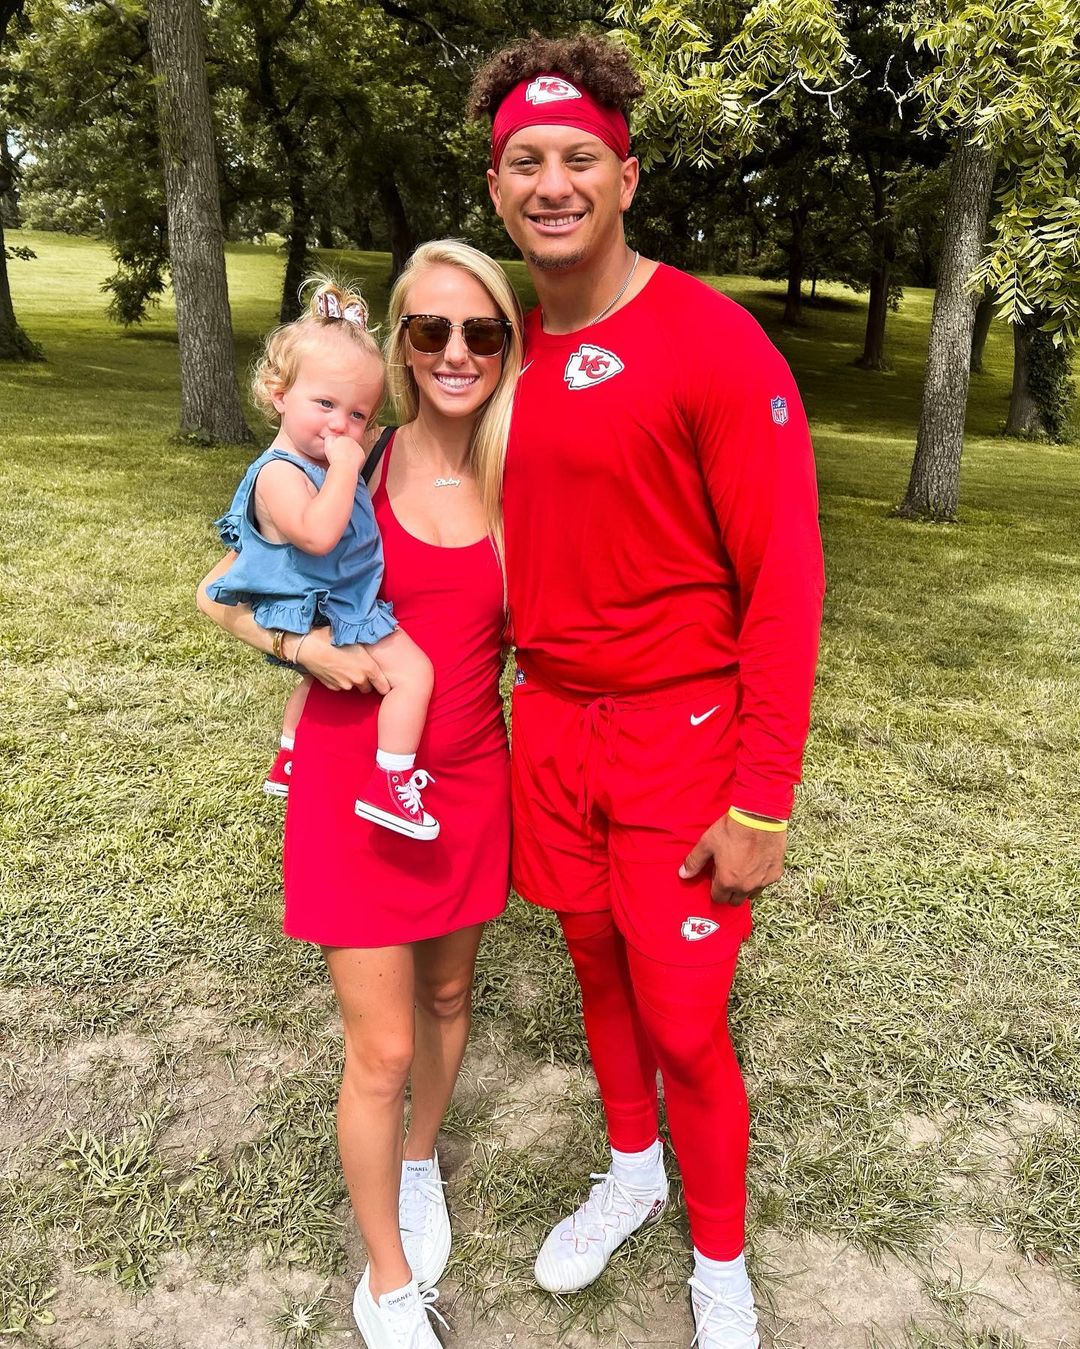 Patrick & Brittany Mahomes give back to Lubbock kids